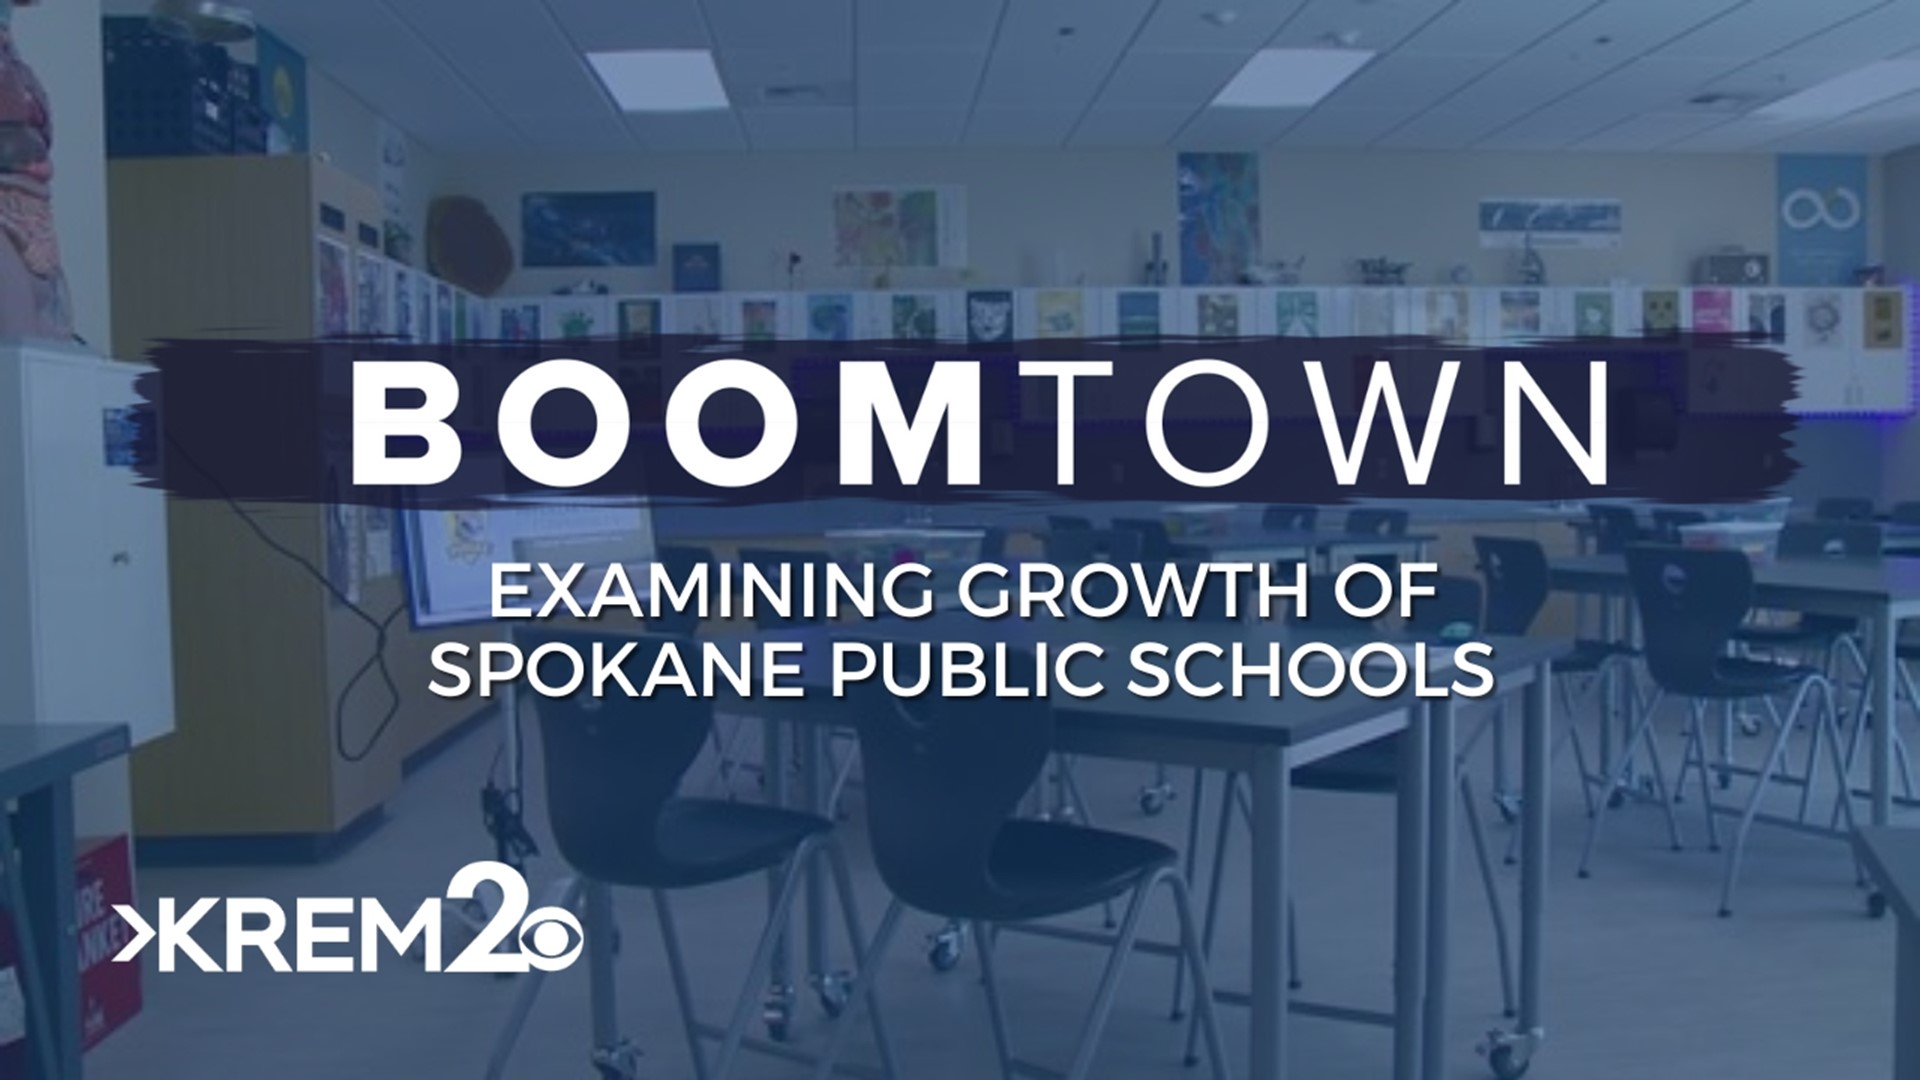 In our boomtown series we track growth in our community. KREM 2 looks at class size trends over the last five years.